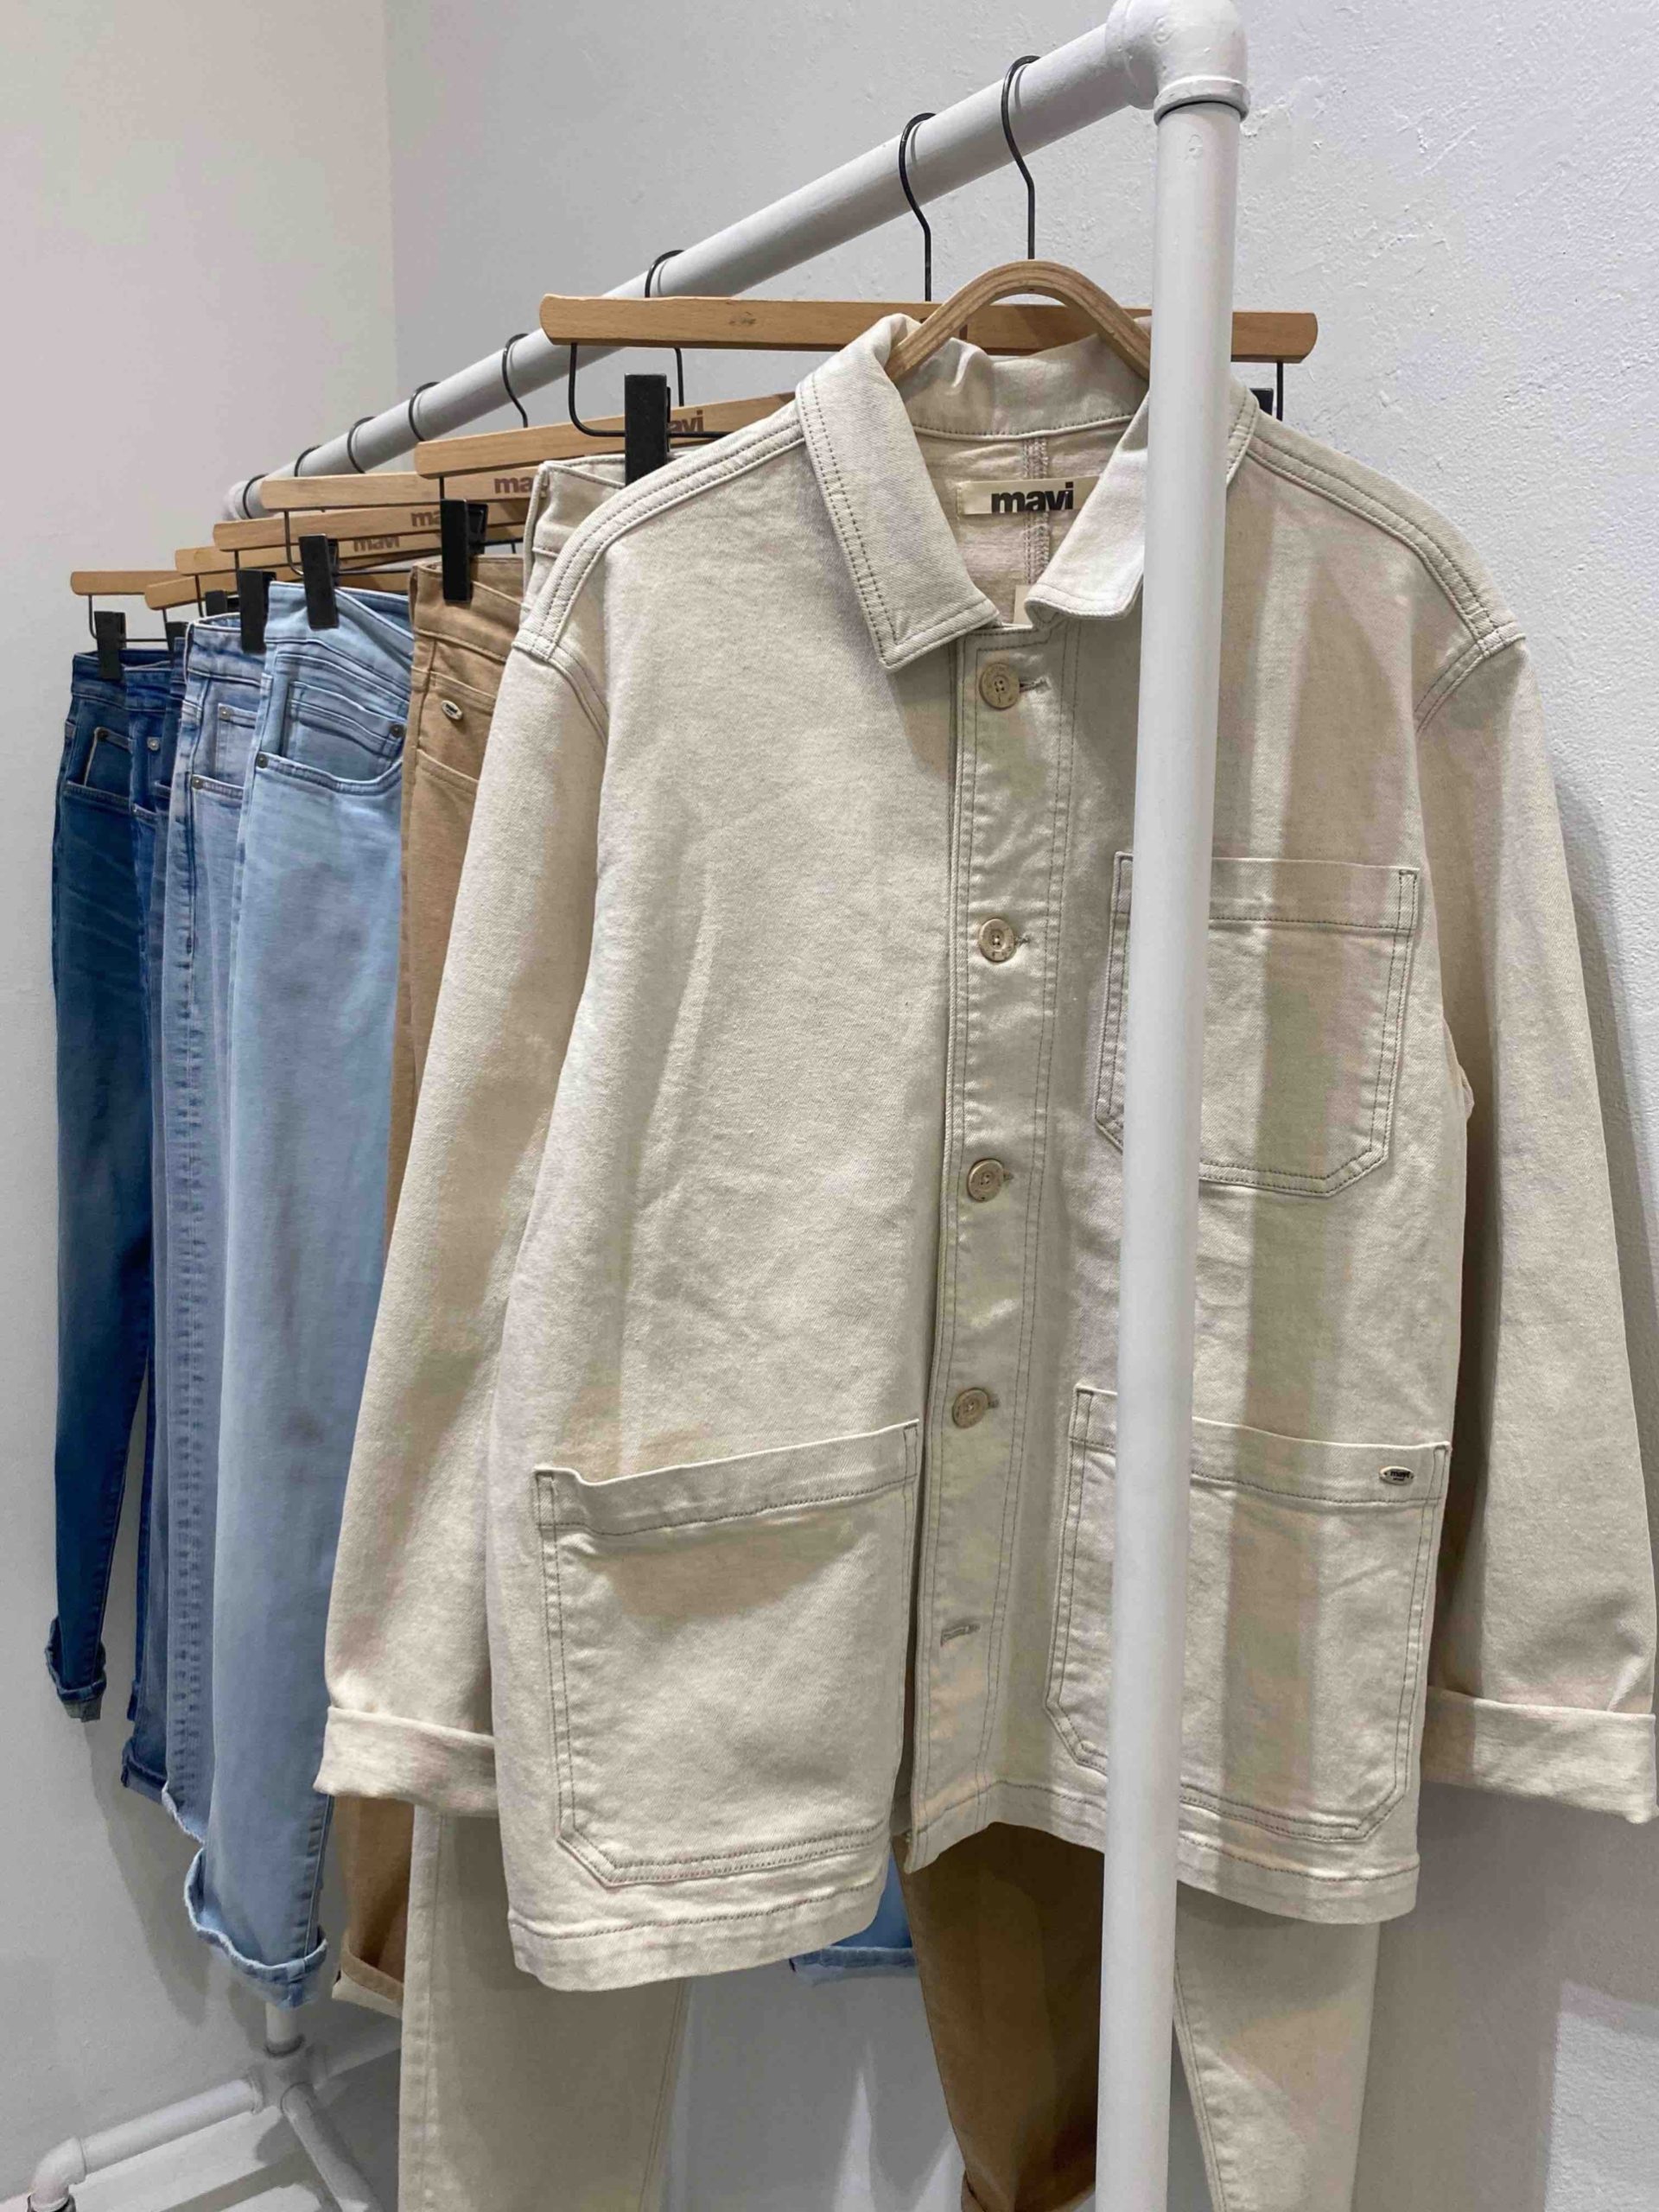 Mavi’s New Collection Features This Spring’s Biggest Trends Like Utility